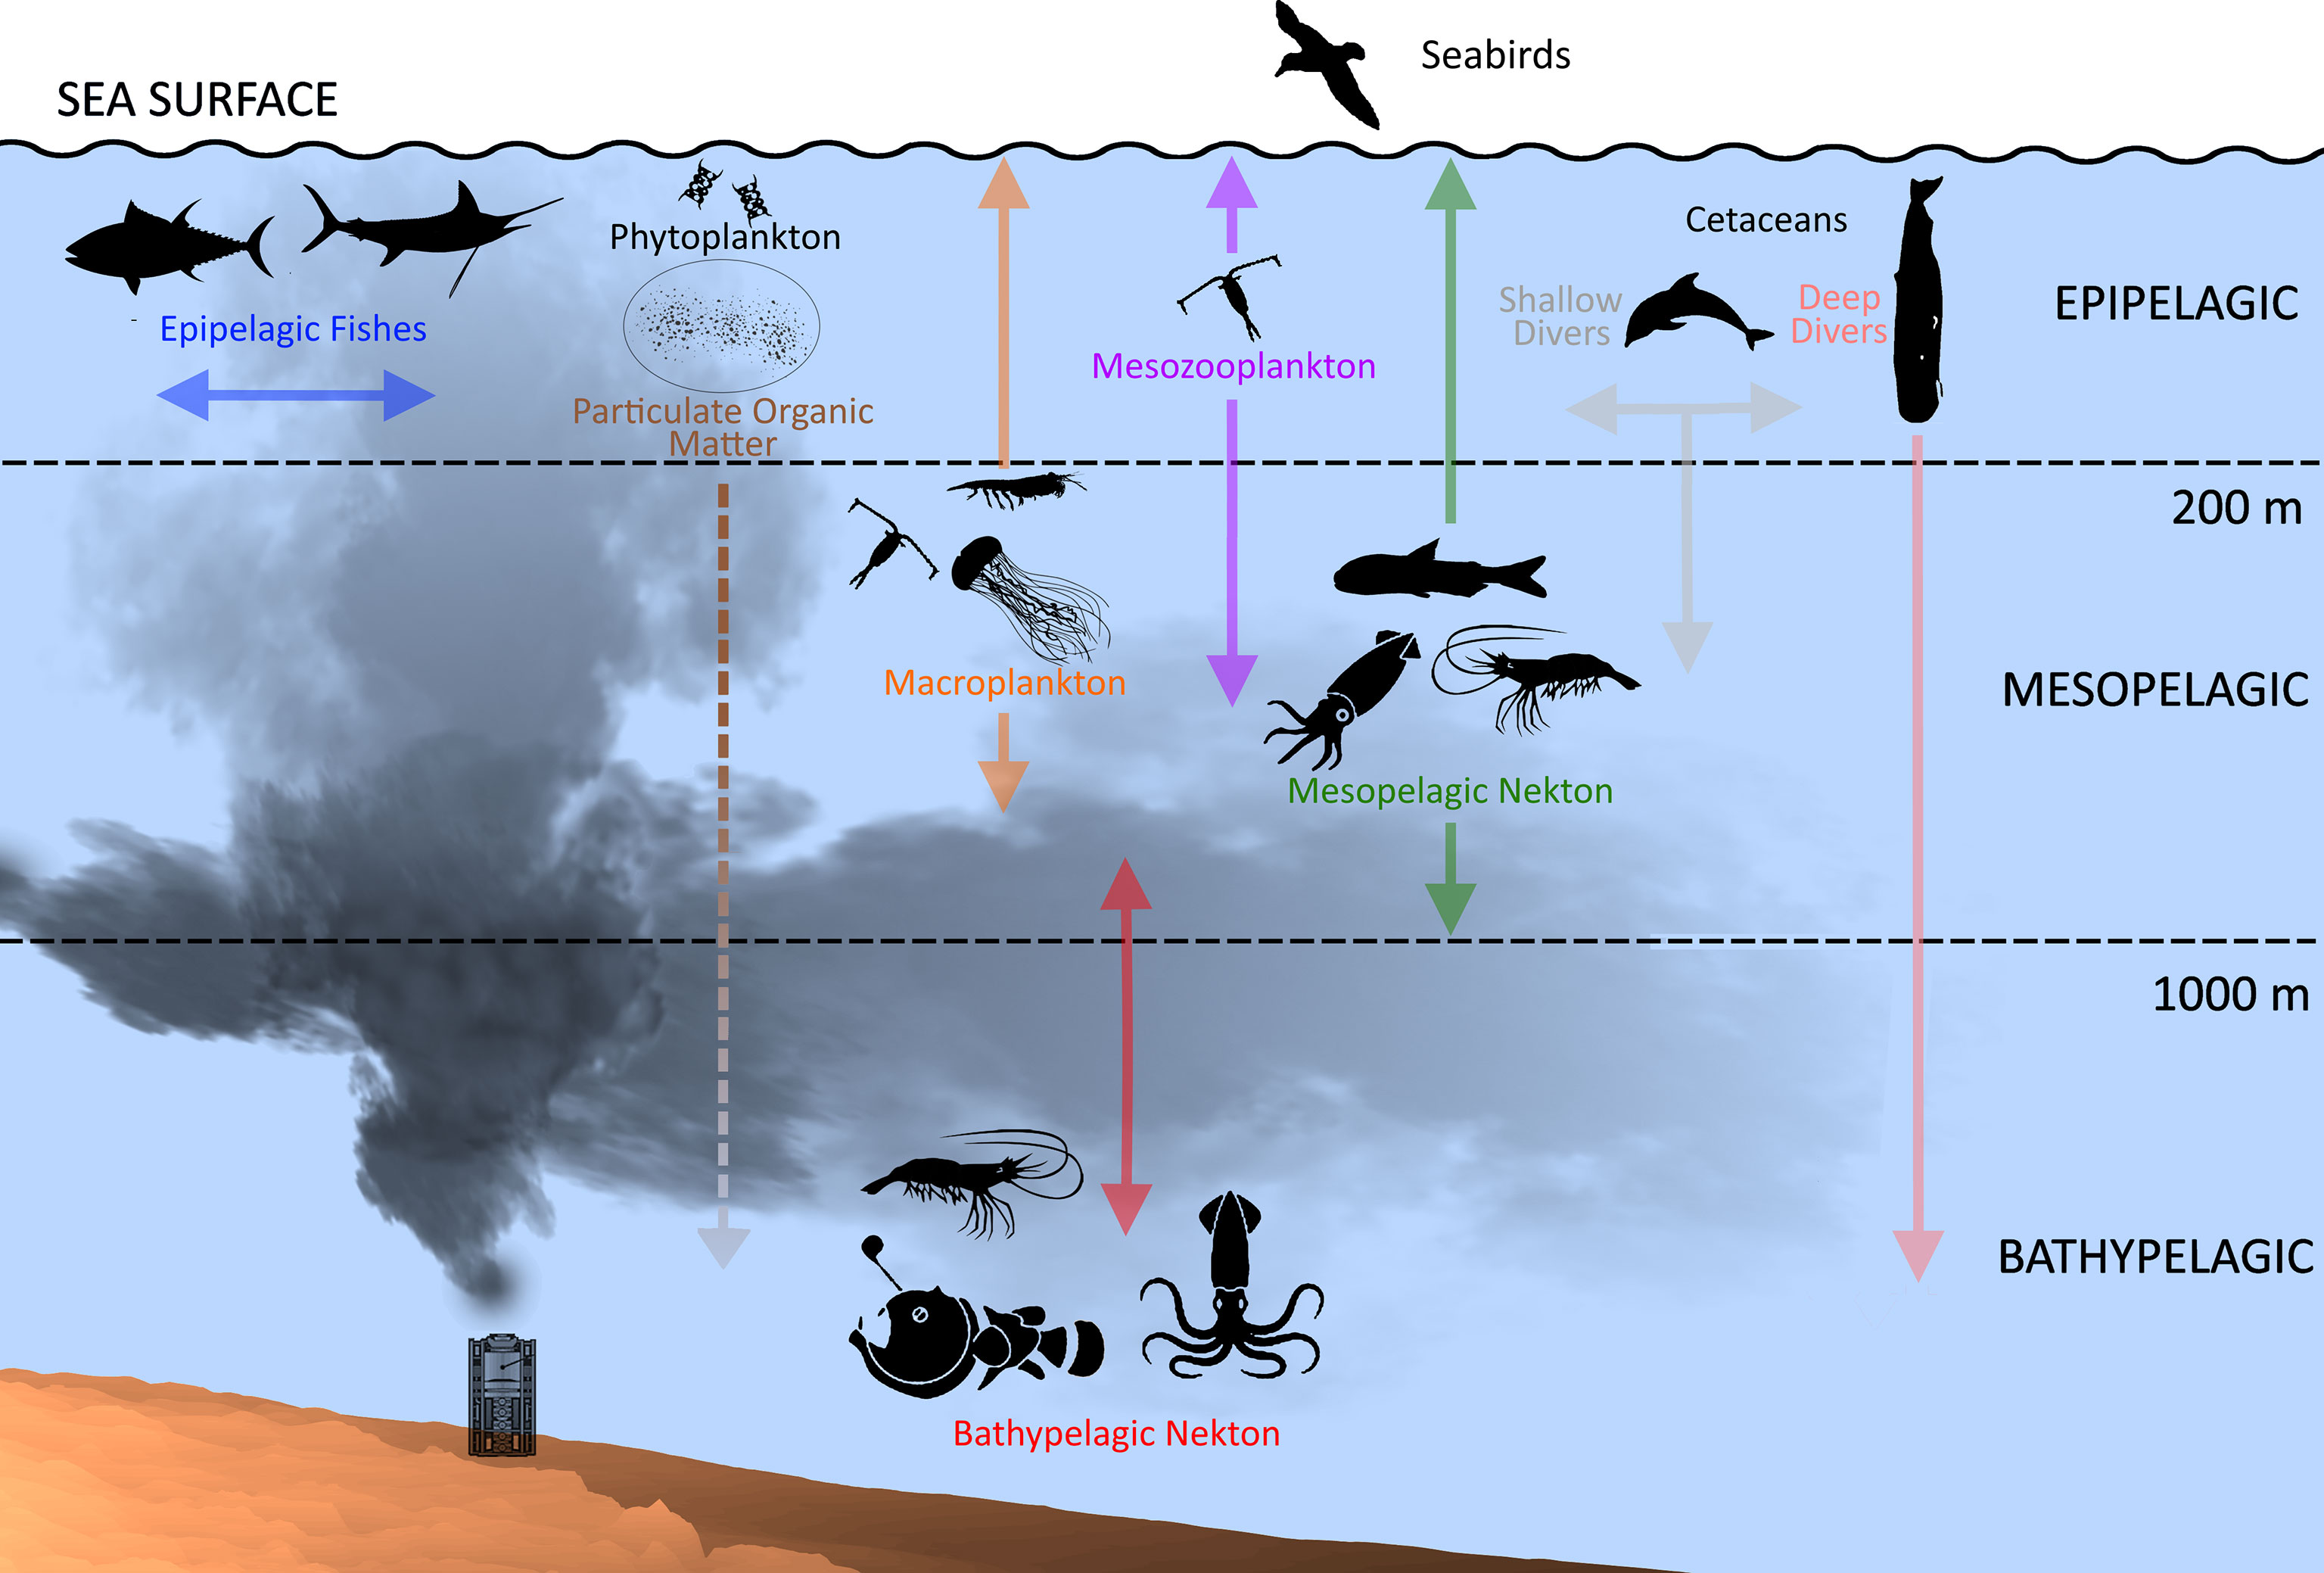 Schematic showing the range for seabirds, epipelagic fish, Phytoplankton, Macroplankton, Bathypelagic Nekton, Mesozooplankton, Mesopelagic Nekton, and Cetaceans at the sea surface and in the Epipelagic, Mesopelagic, and Bathypelatic zones.